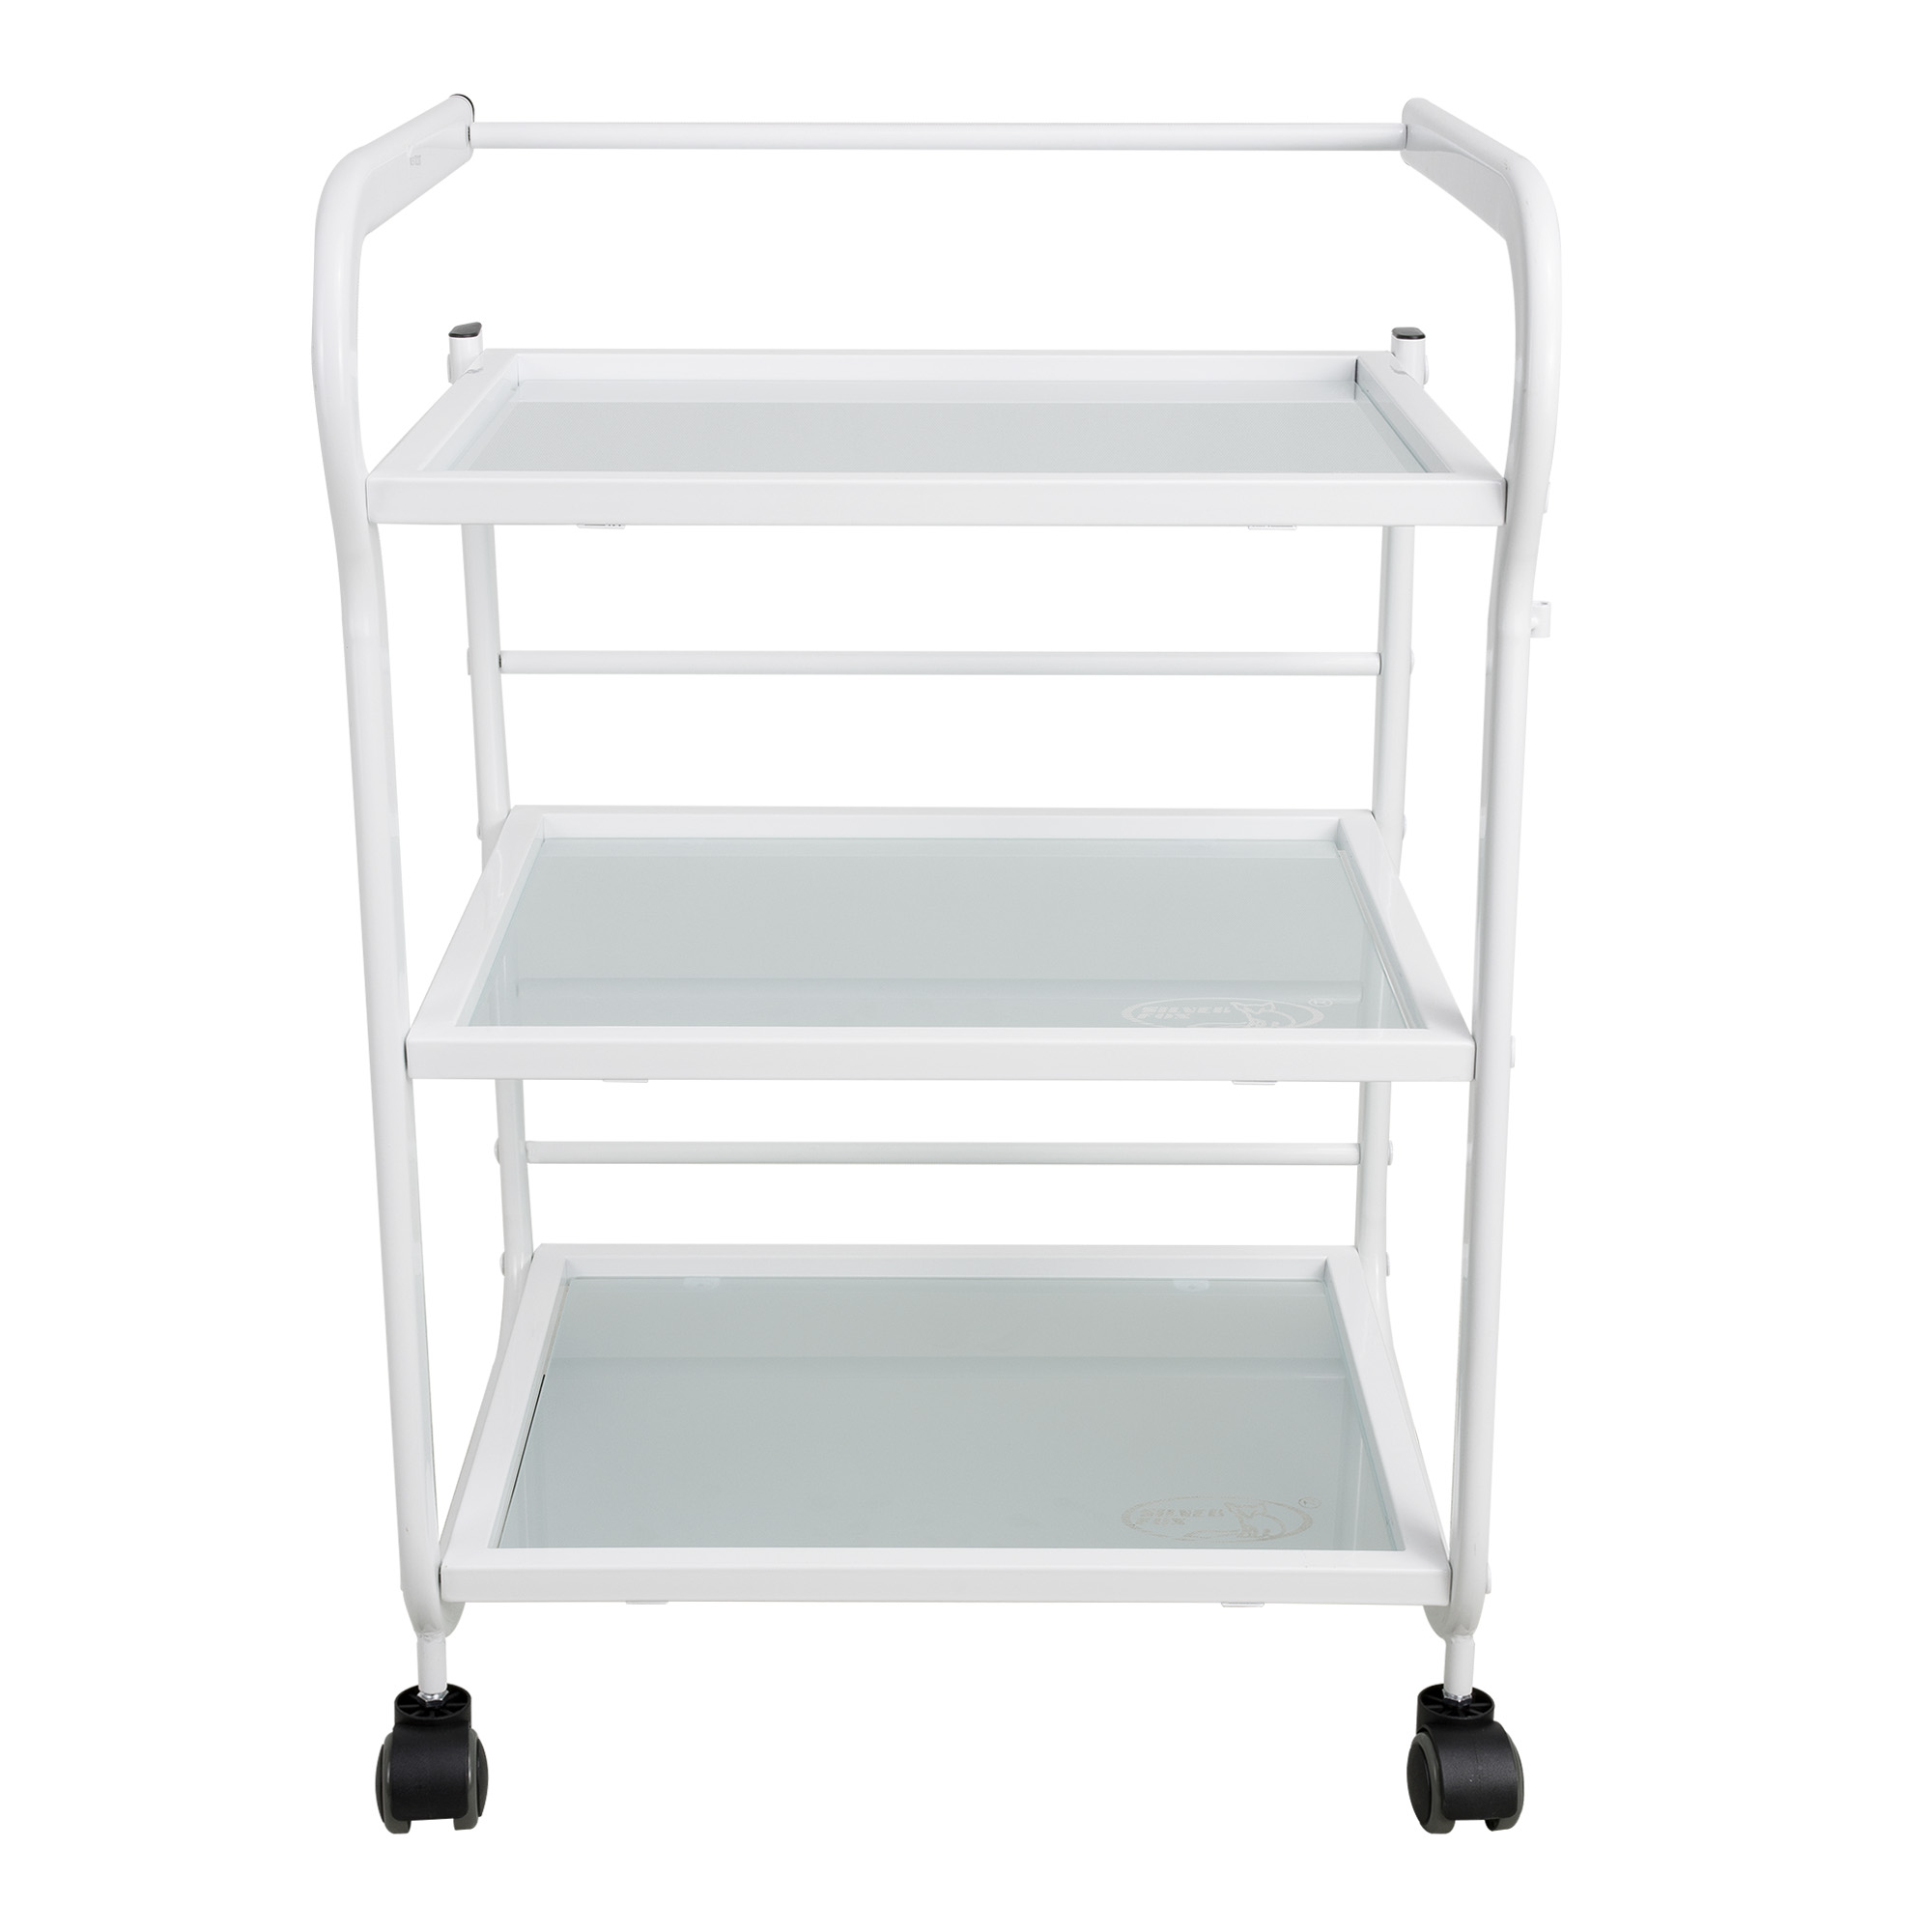 Professional furniture trolley for beauty salon 3 shelves with handle